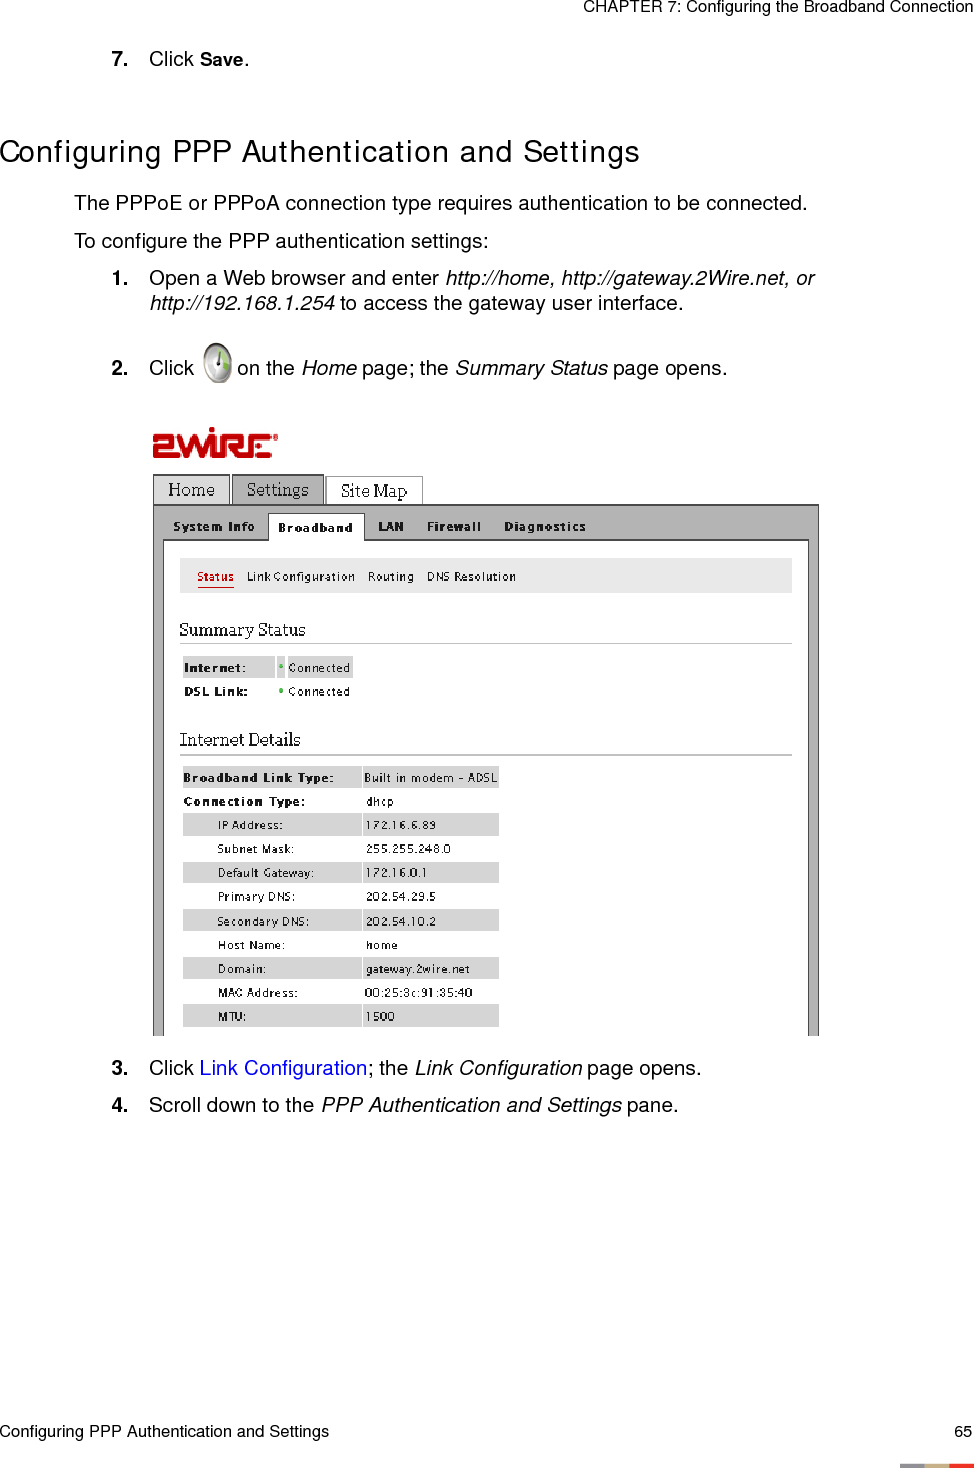 Configuring PPP Authentication and Settings 65CHAPTER 7: Configuring the Broadband Connection7. Click Save. Configuring PPP Authentication and SettingsThe PPPoE or PPPoA connection type requires authentication to be connected. To configure the PPP authentication settings: 1. Open a Web browser and enter http://home, http://gateway.2Wire.net, or http://192.168.1.254 to access the gateway user interface. 2. Click   on the Home page; the Summary Status page opens.3. Click Link Configuration; the Link Configuration page opens. 4. Scroll down to the PPP Authentication and Settings pane. 